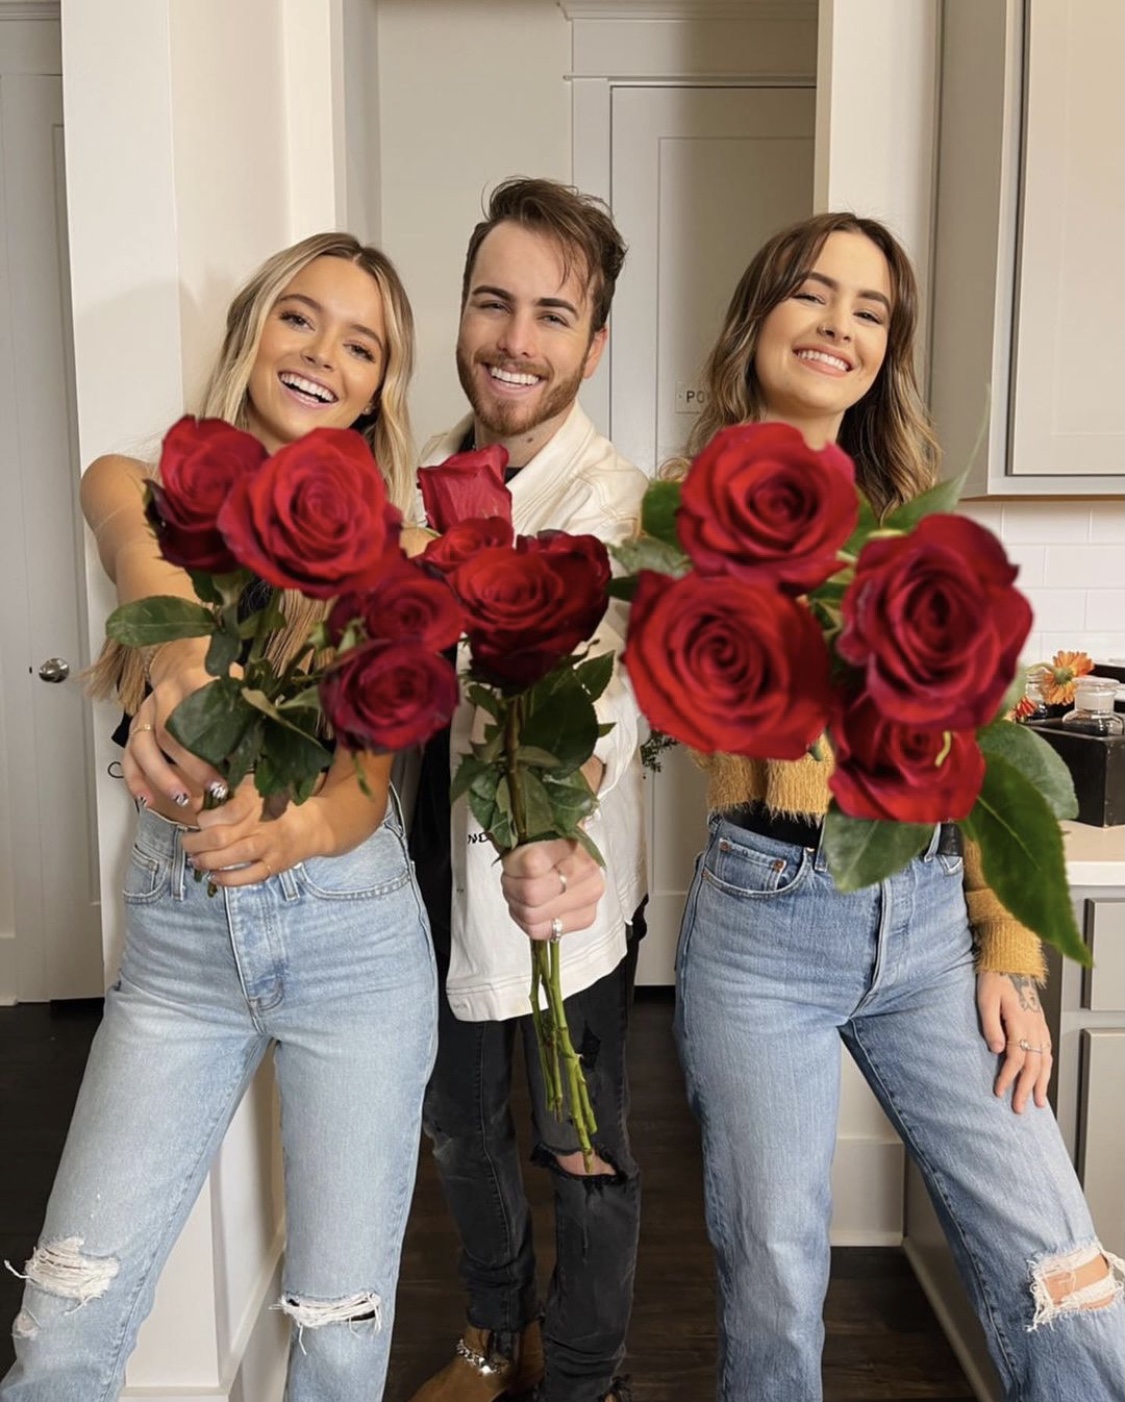 Country Trio Temecula Road Performs on ABC’s “The Bachelor” (Watch)